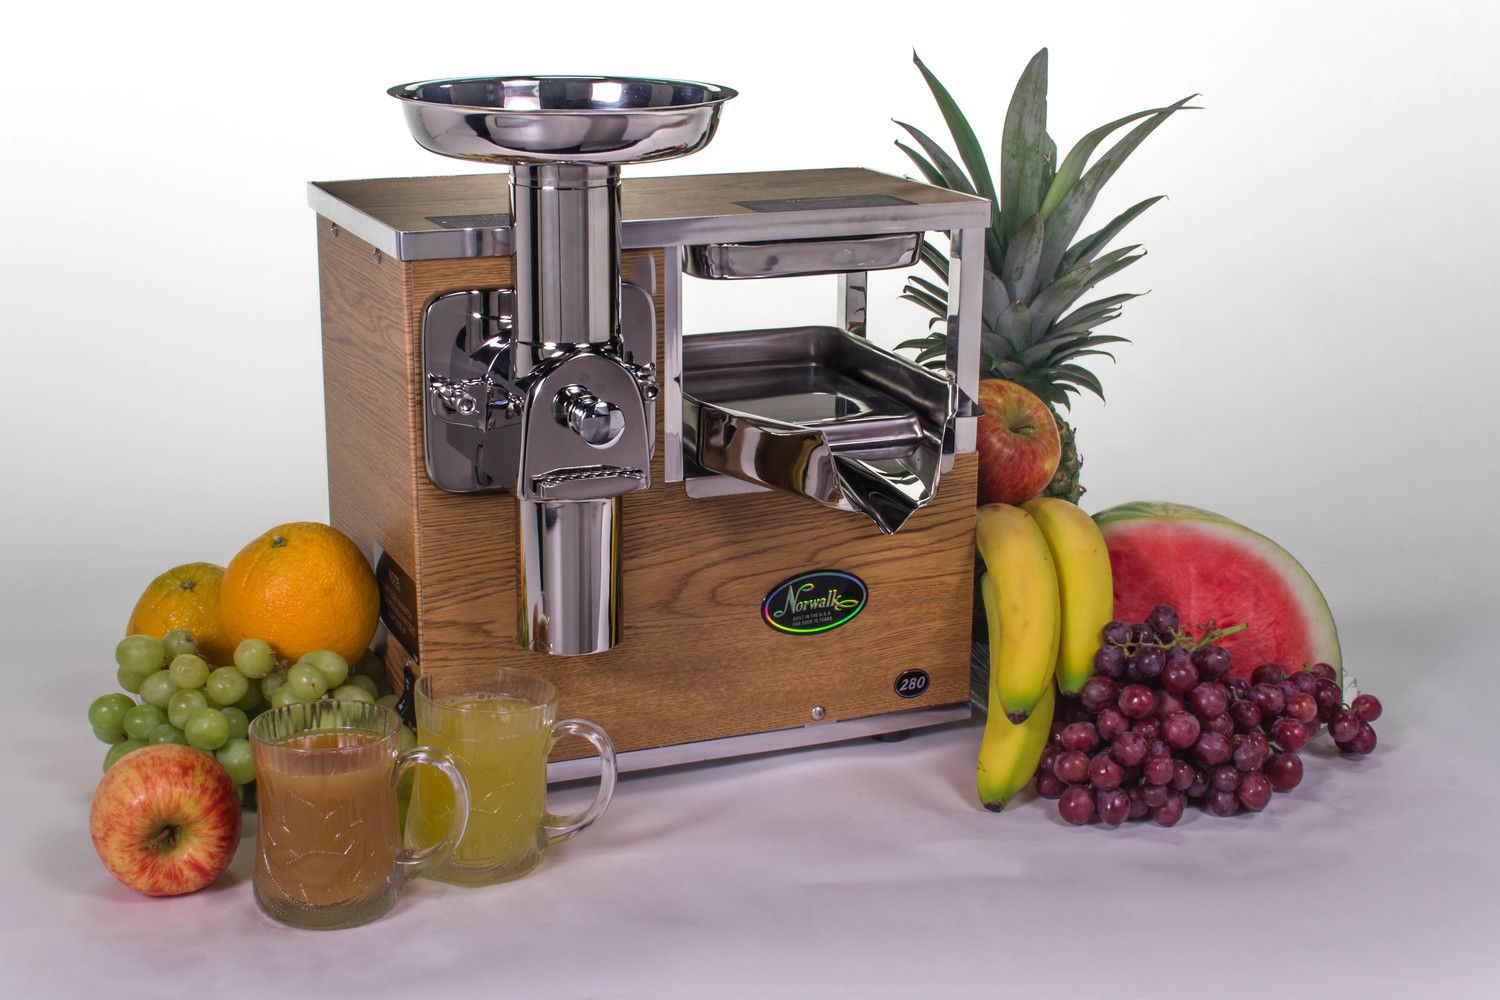 Where To Buy A Norwalk Juicer